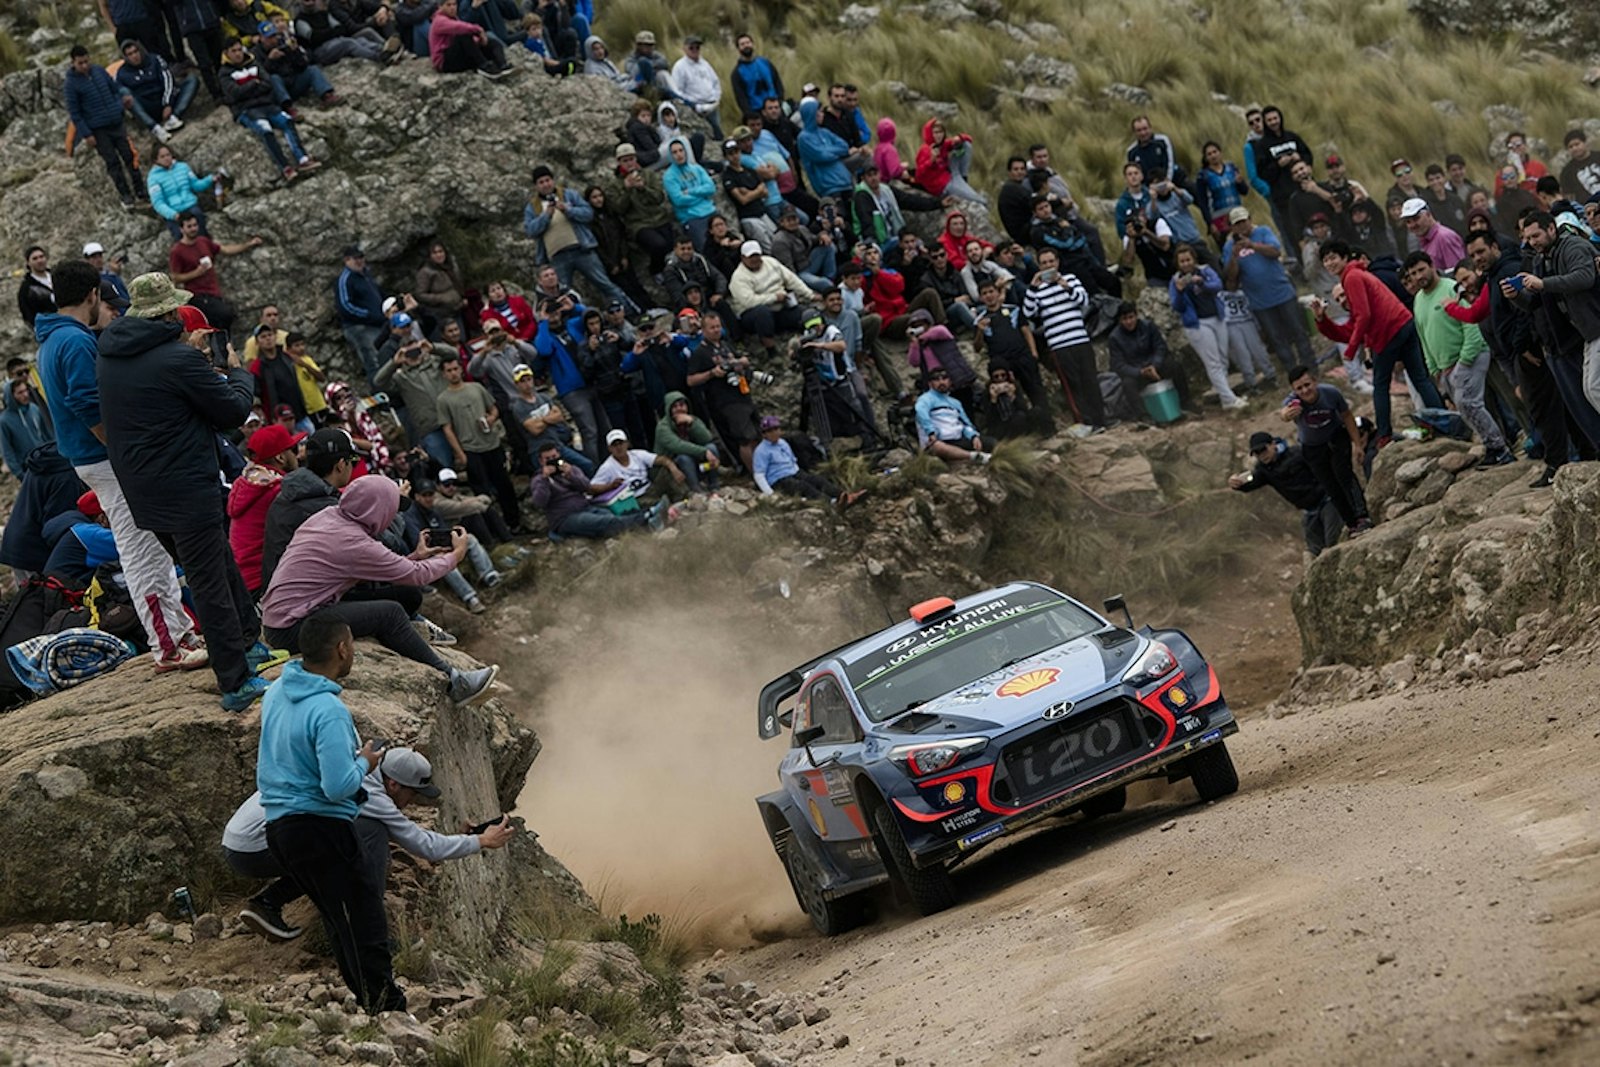 Dani Sordo (ESP) performs during FIA World Rally Championship 2018 in Cordoba, Argentina on 29.04.2018 // Jaanus Ree/Red Bull Content Pool // AP-1VGXMZ3912111 // Usage for editorial use only // Please go to www.redbullcontentpool.com for further information. //